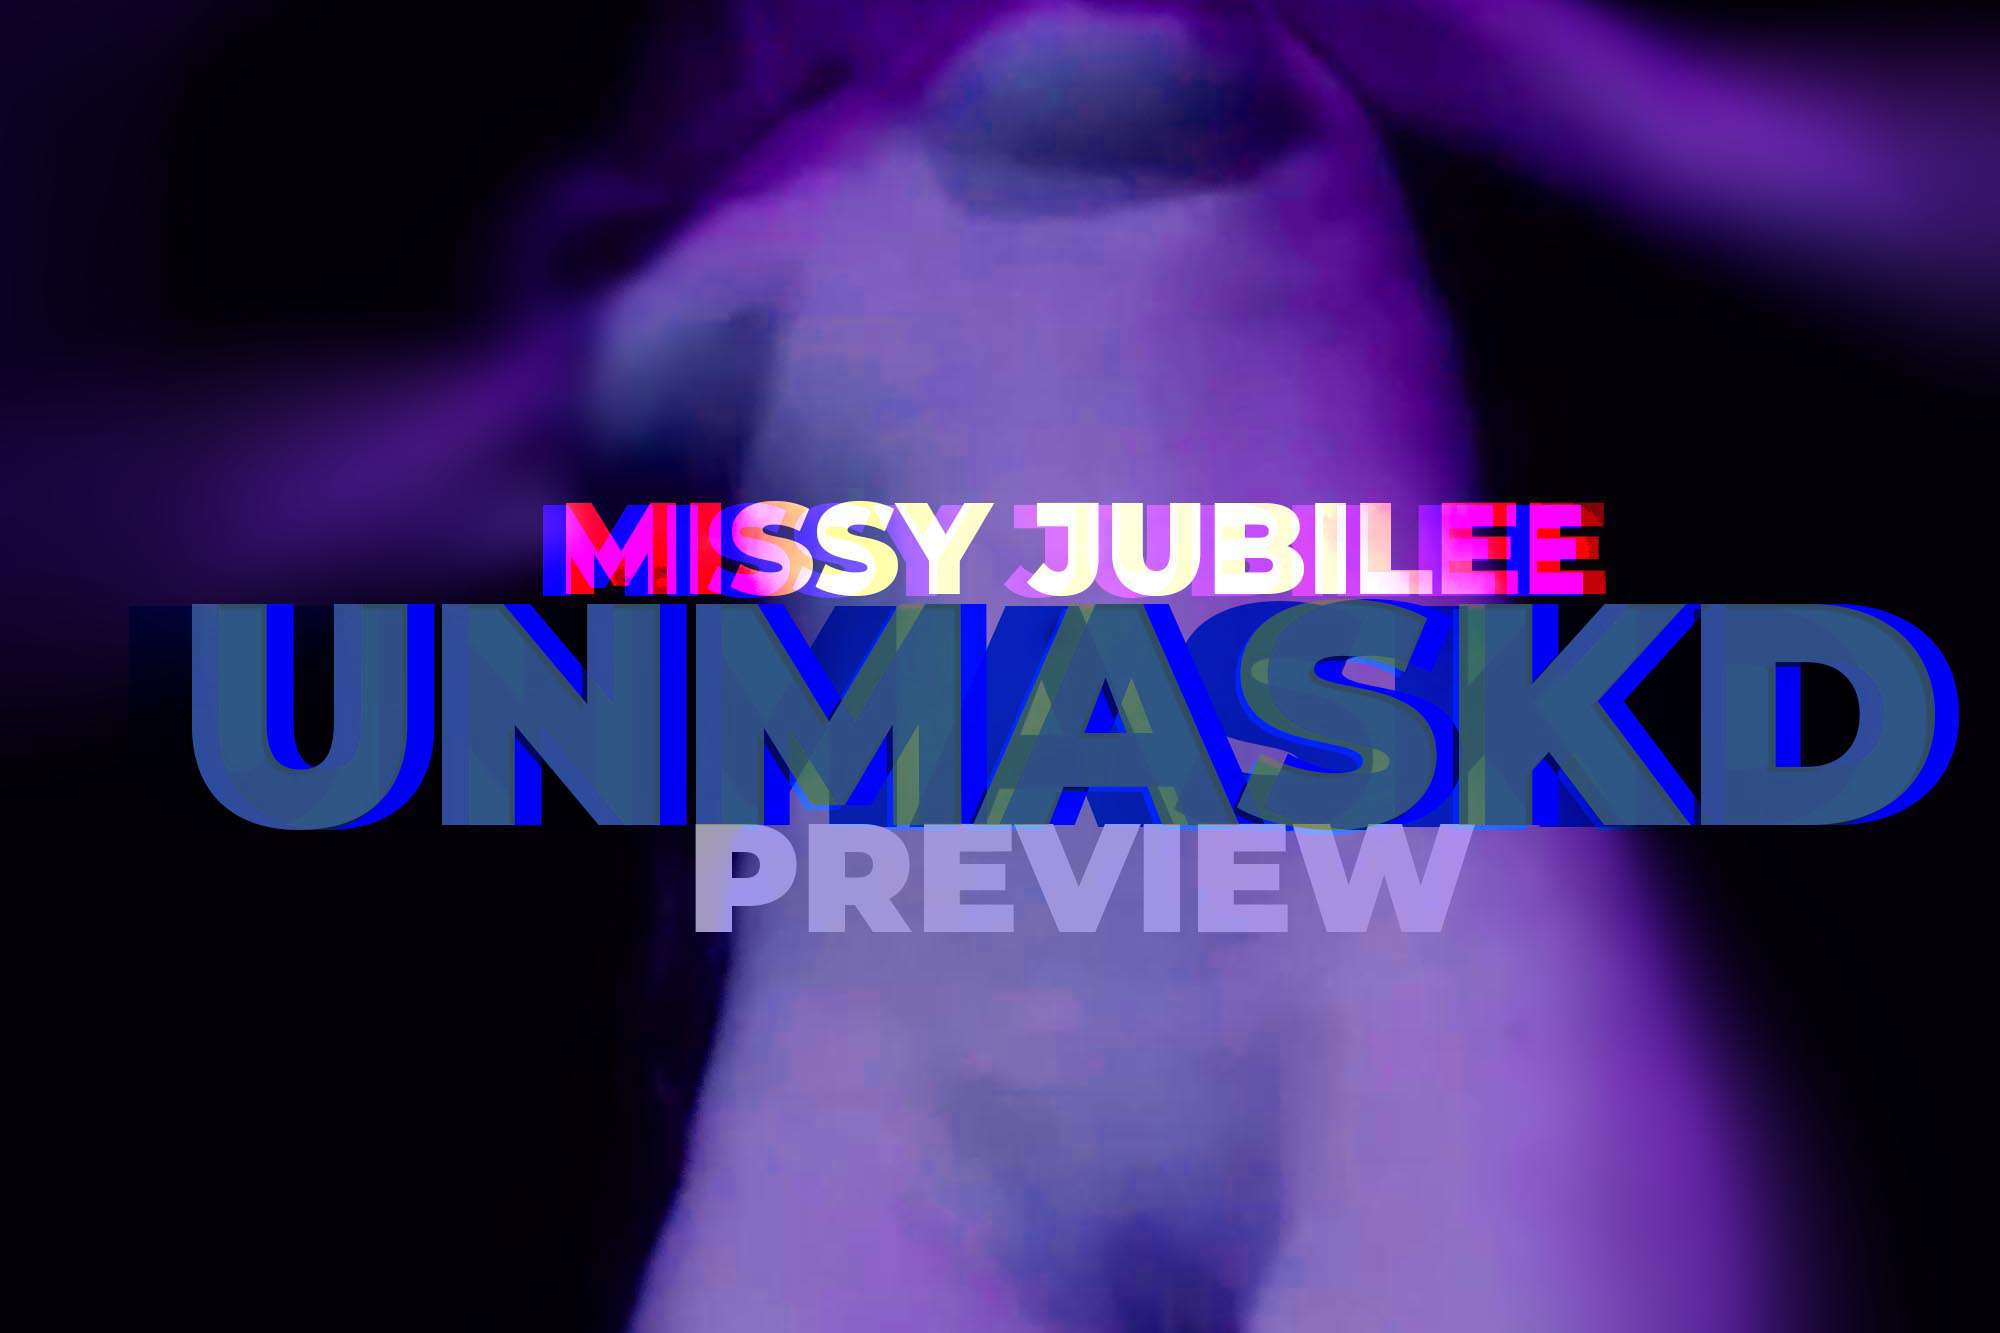 Film release poster Missy Jubilee 033 UNMASKED PREVIEW